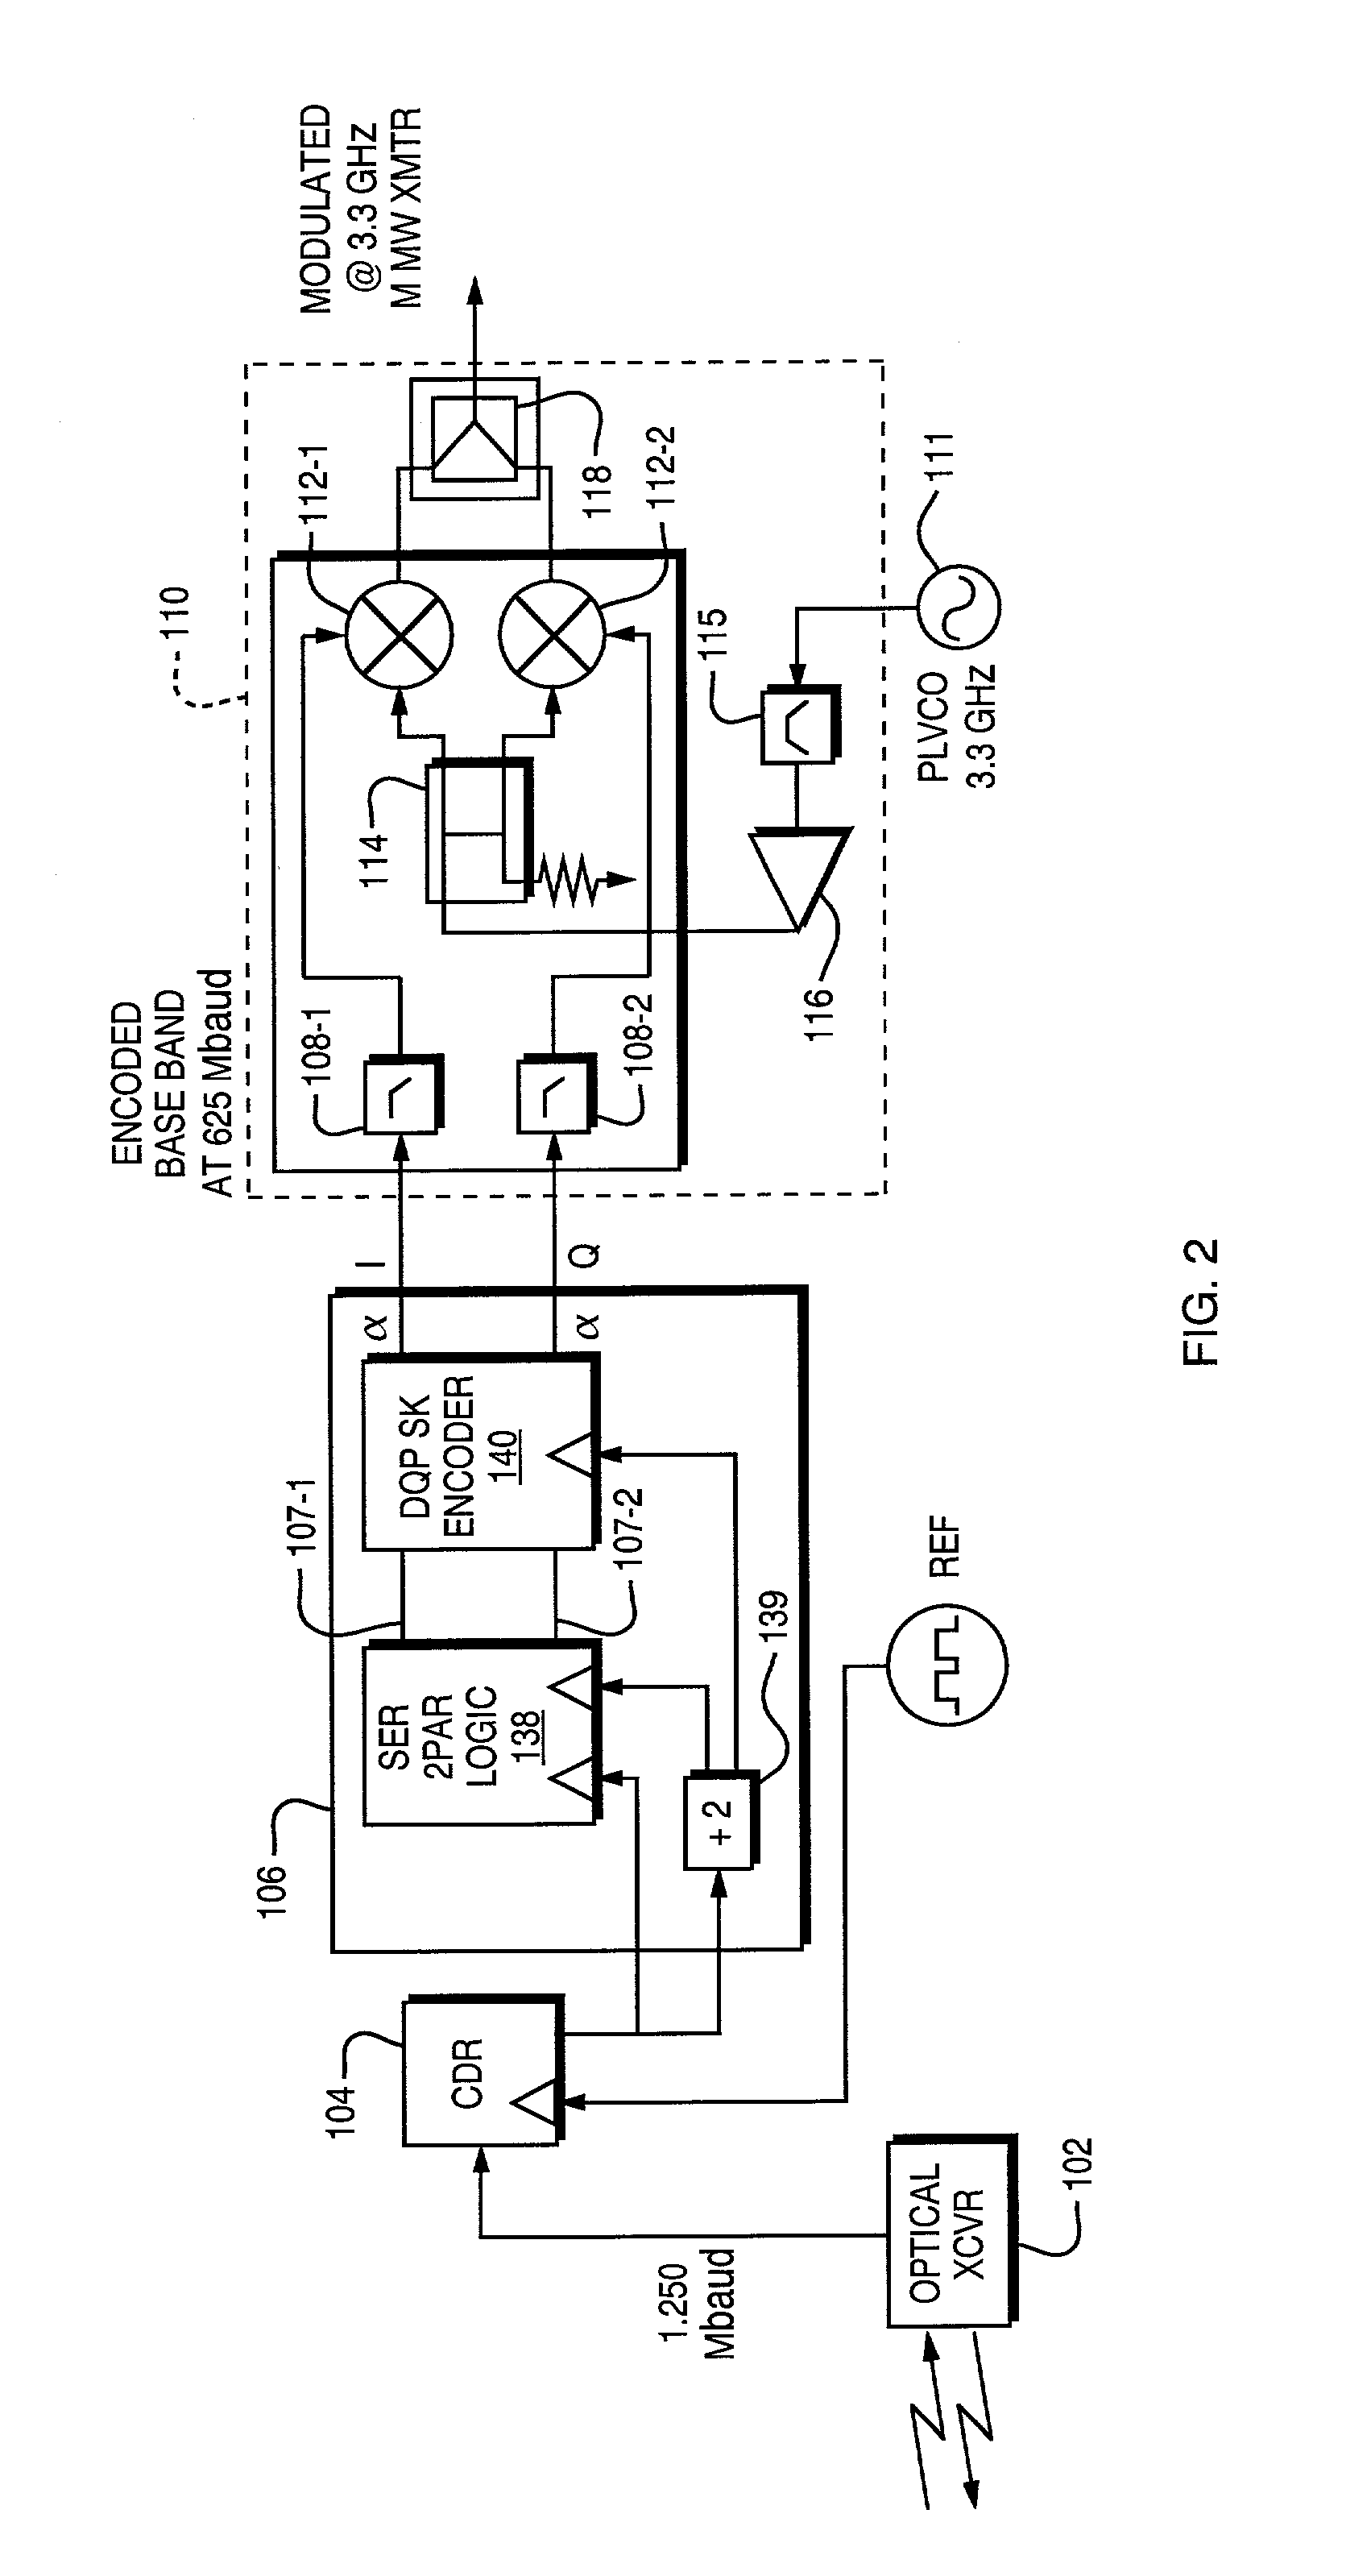 Architecture for wireless transmission of high rate optical signals